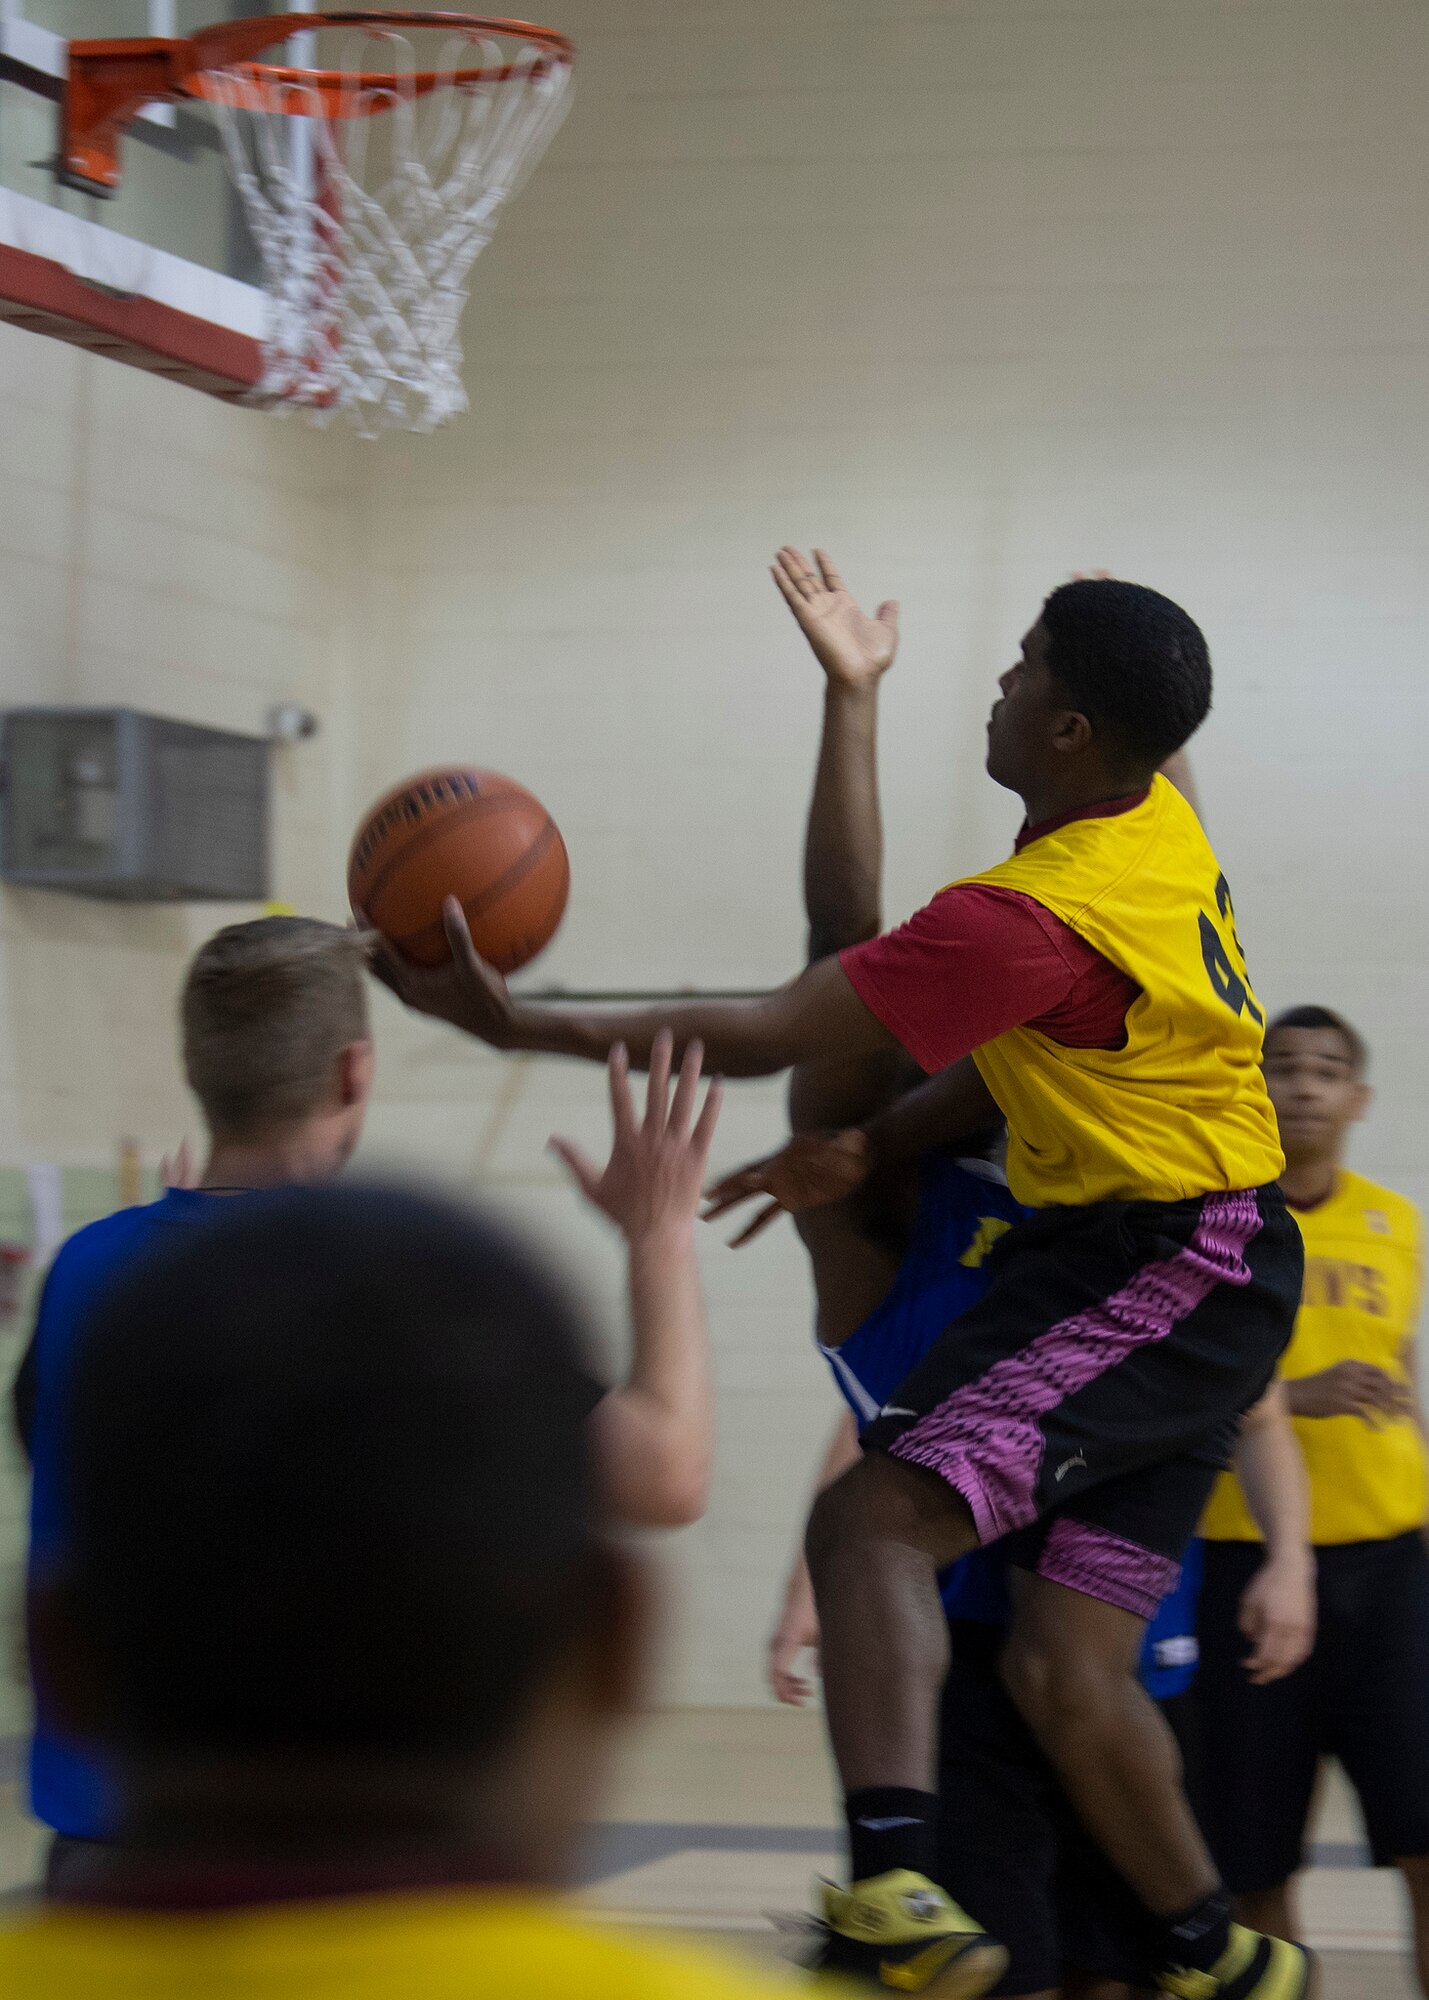 WSSS-Lopez guard Airman 1st Class Yaukis Cole drives by AFRL guard 1st Lt. Brennan Taylor in an intramural basketball contest at Kirtland Air Force Base, N.M., Jan. 17, 2019. Cole and WSSS-Lopez promised an intramural basketball championship this season, but did not find success against AFRL, losing 41-47. (U.S. Air Force photo by Staff Sgt. J.D. Strong II)